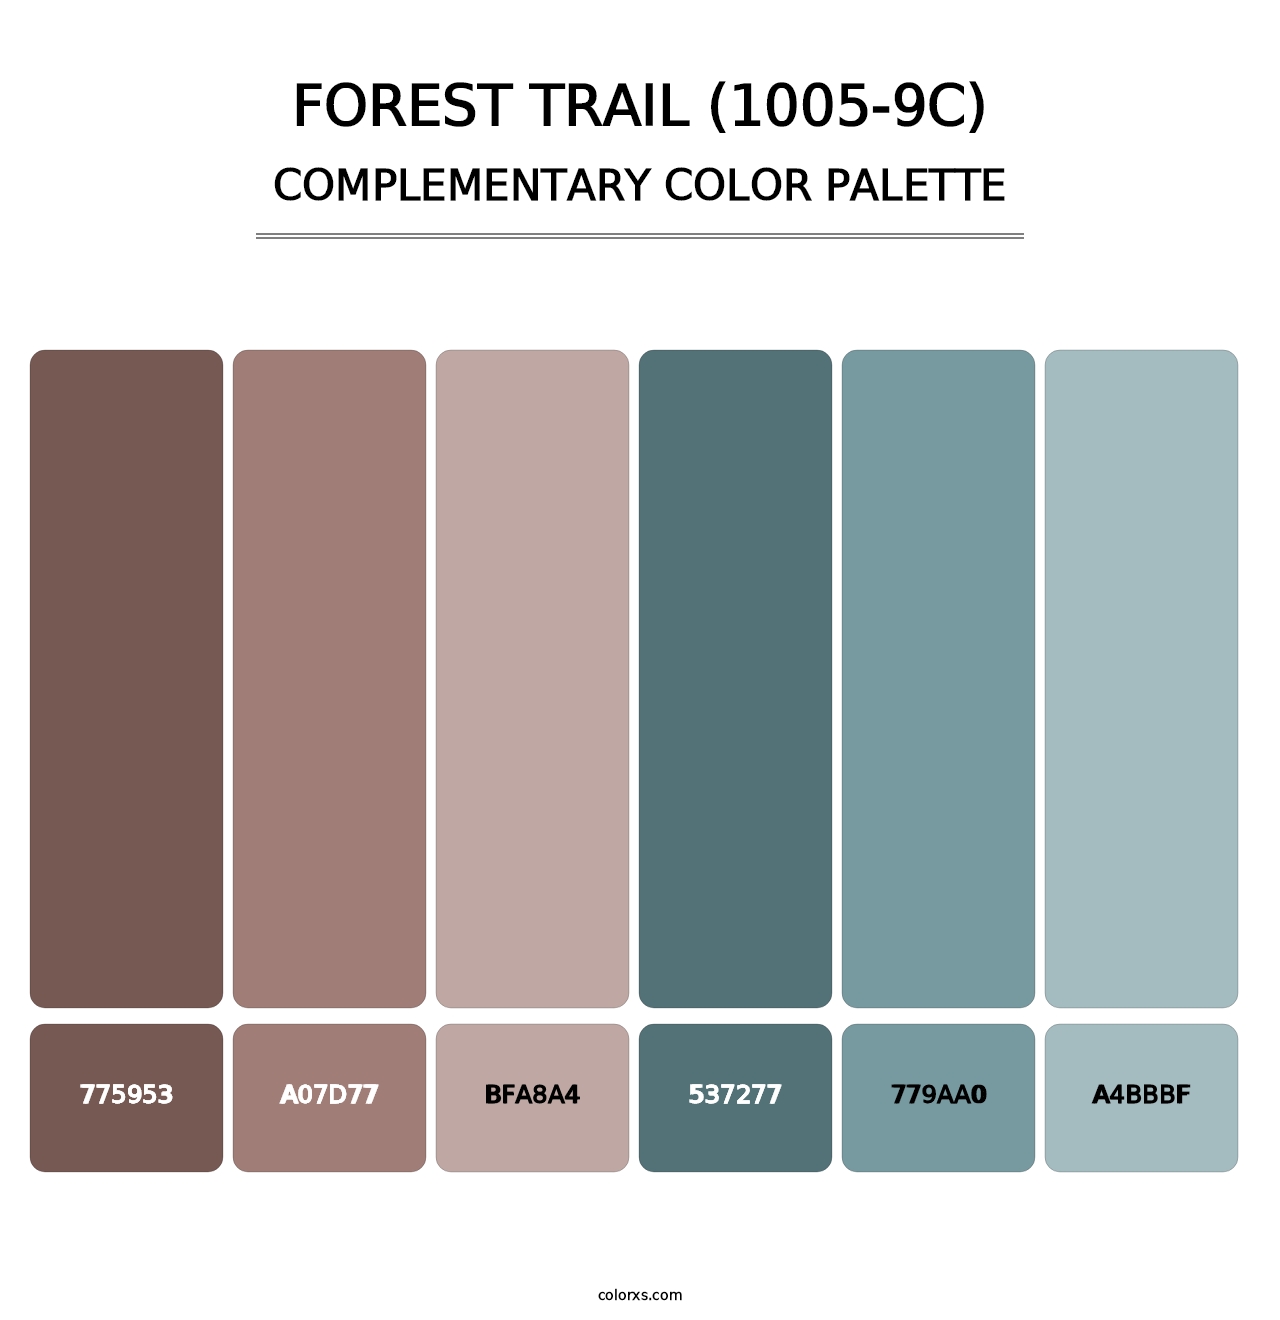 Forest Trail (1005-9C) - Complementary Color Palette